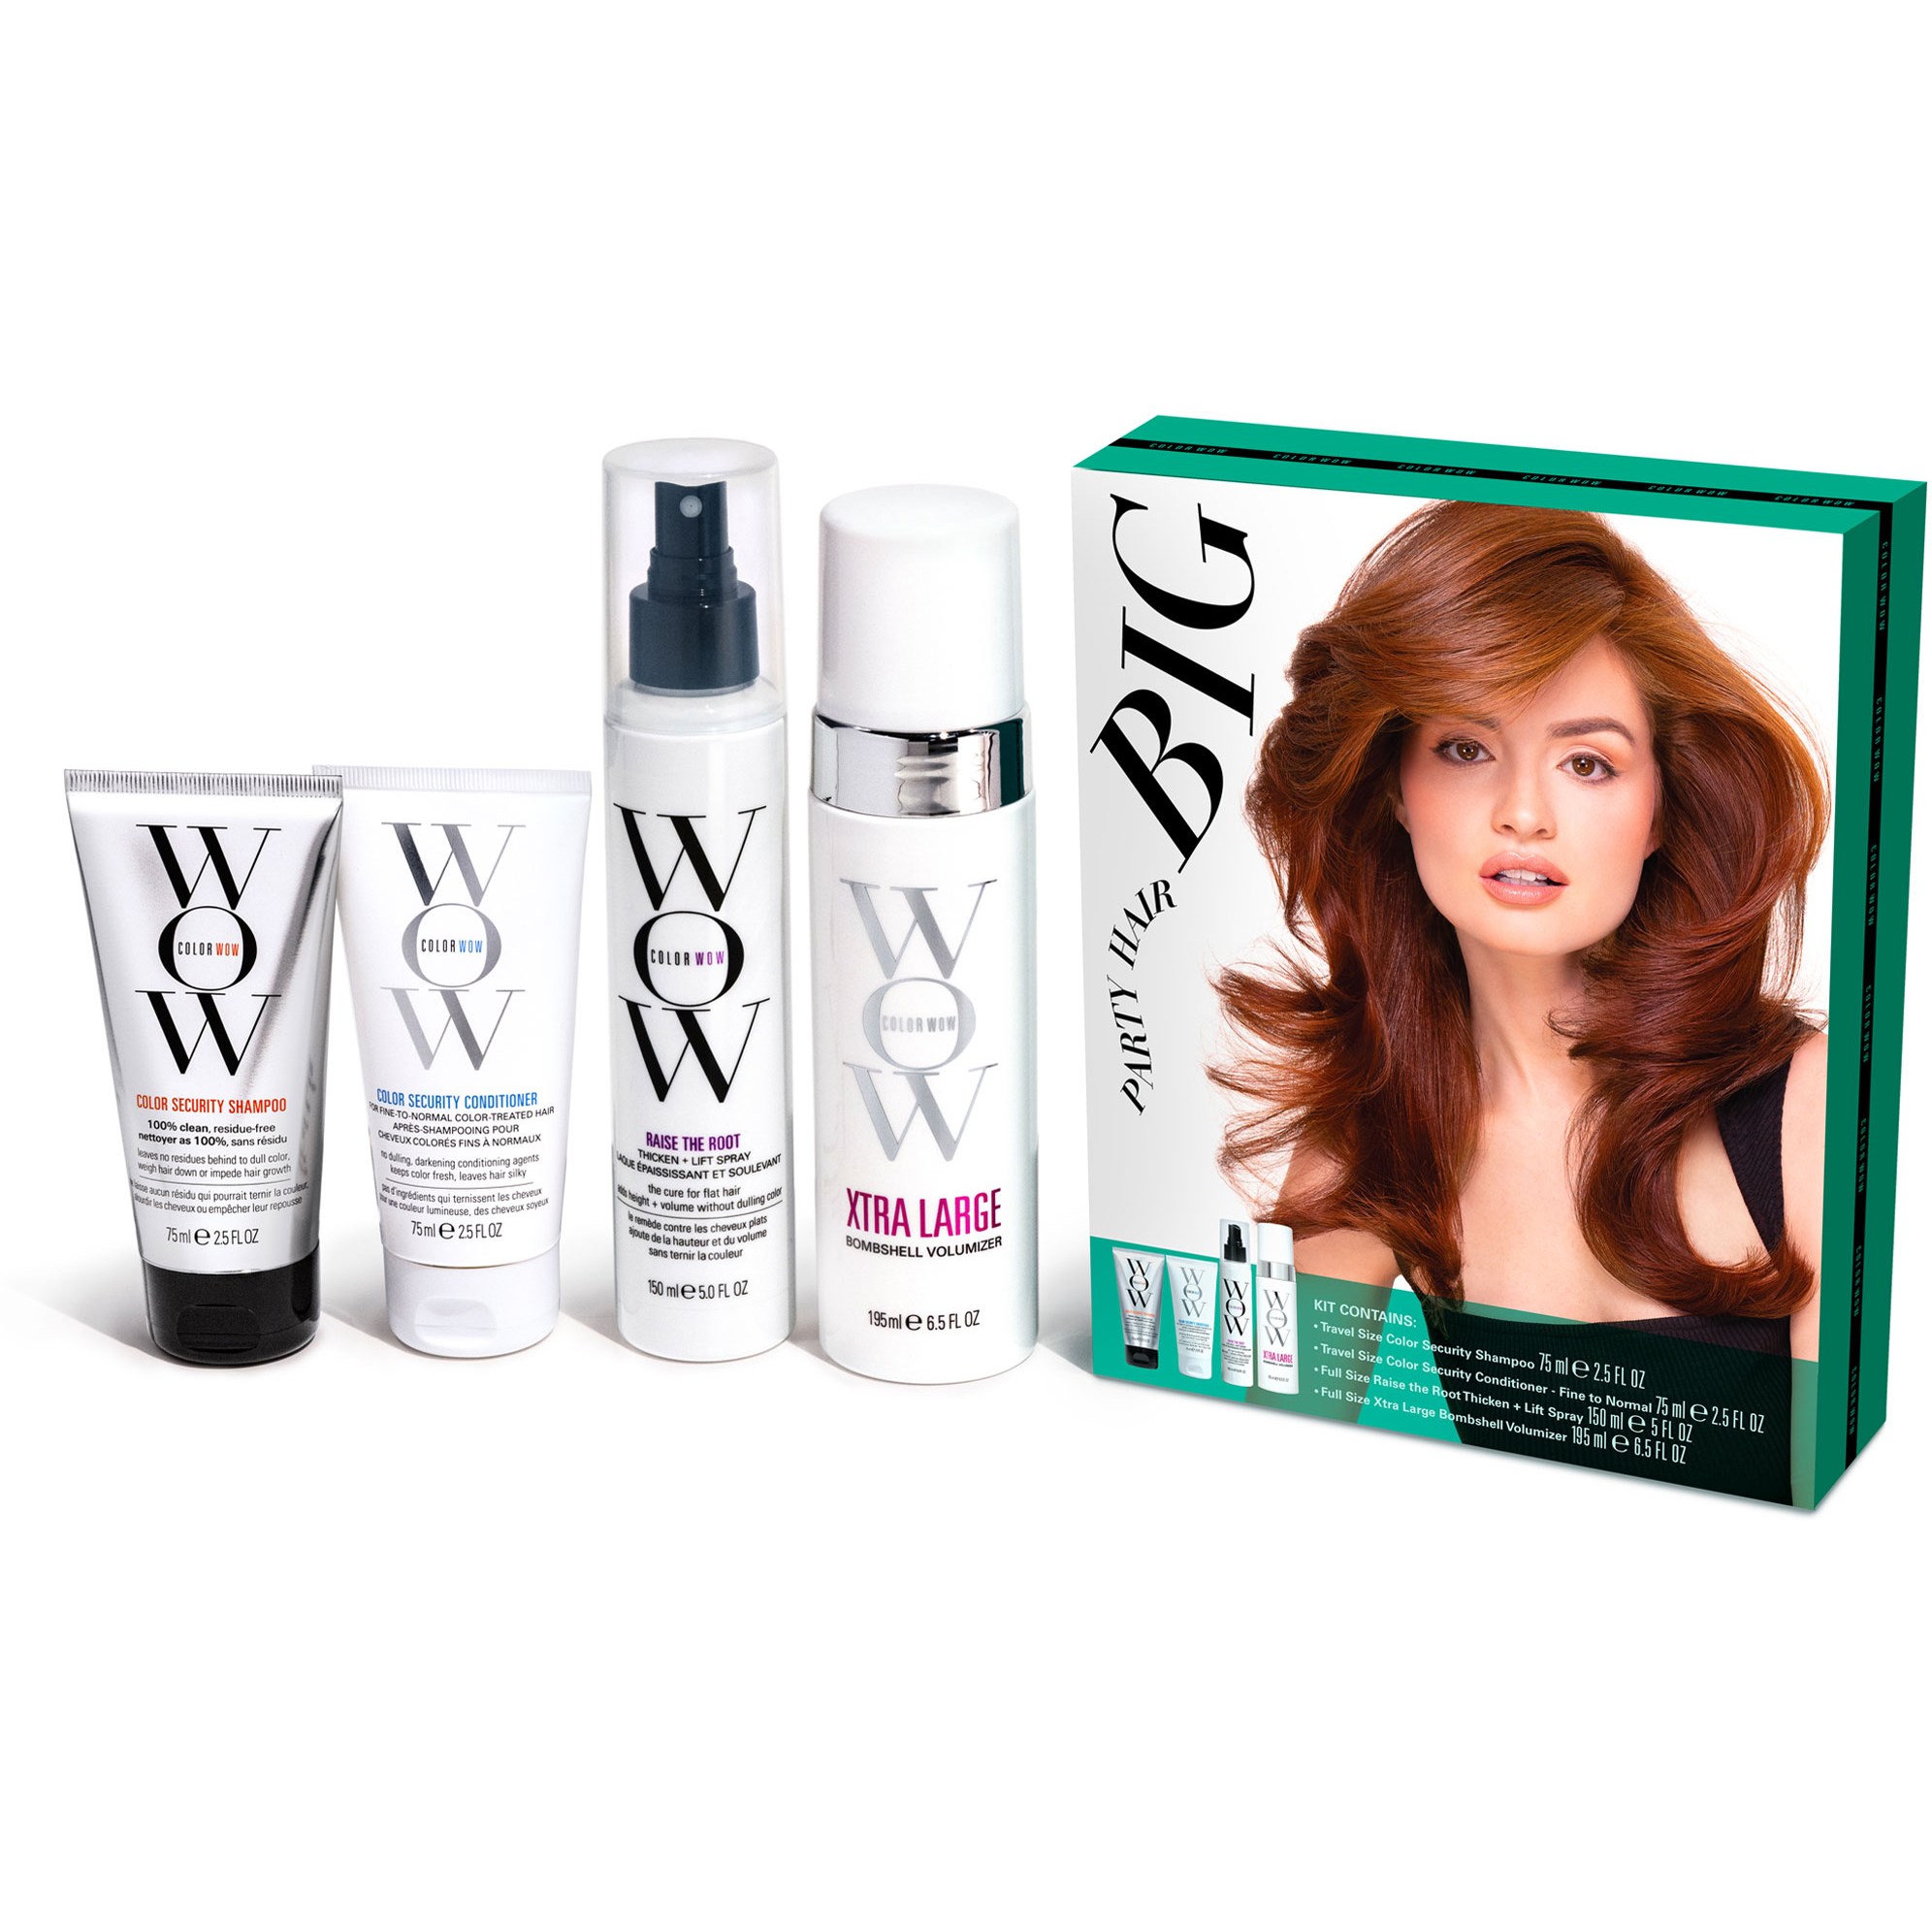 Läs mer om Color Wow Big Volume Party Hair Holiday Kit